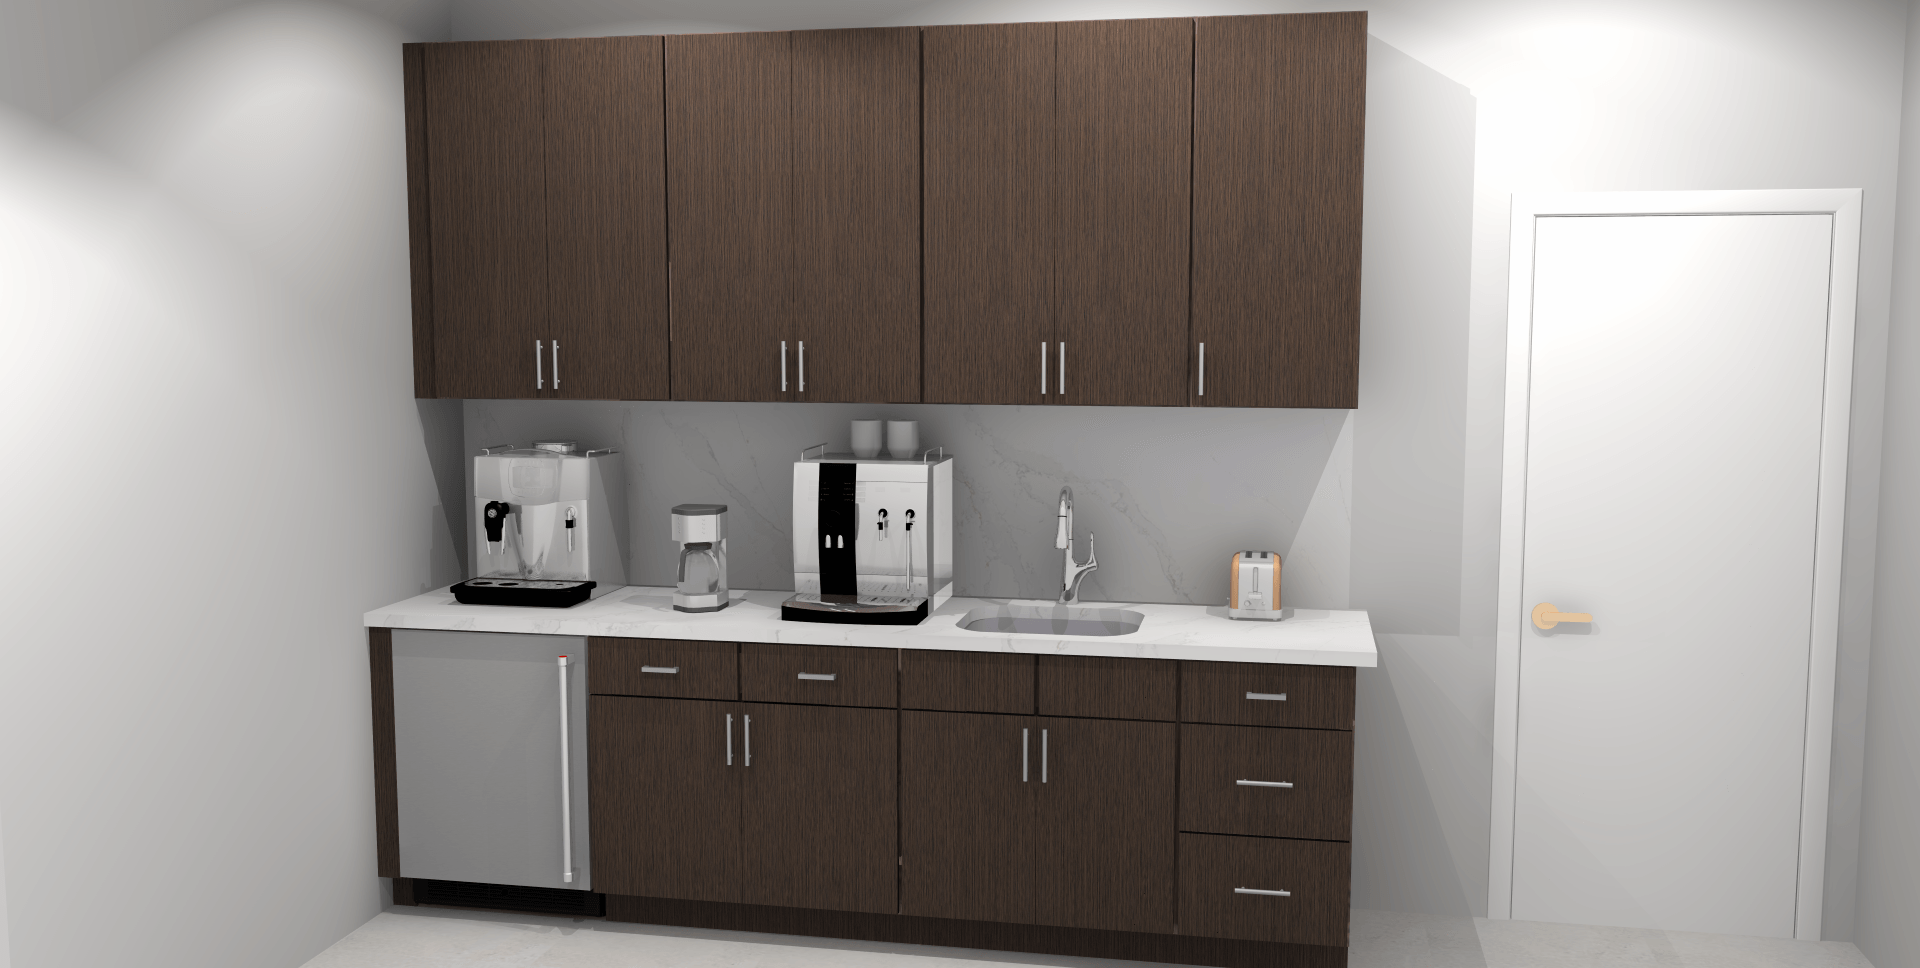 Set of Fitments - Brown Color Kitchen Cabinet in Harrison, NJ